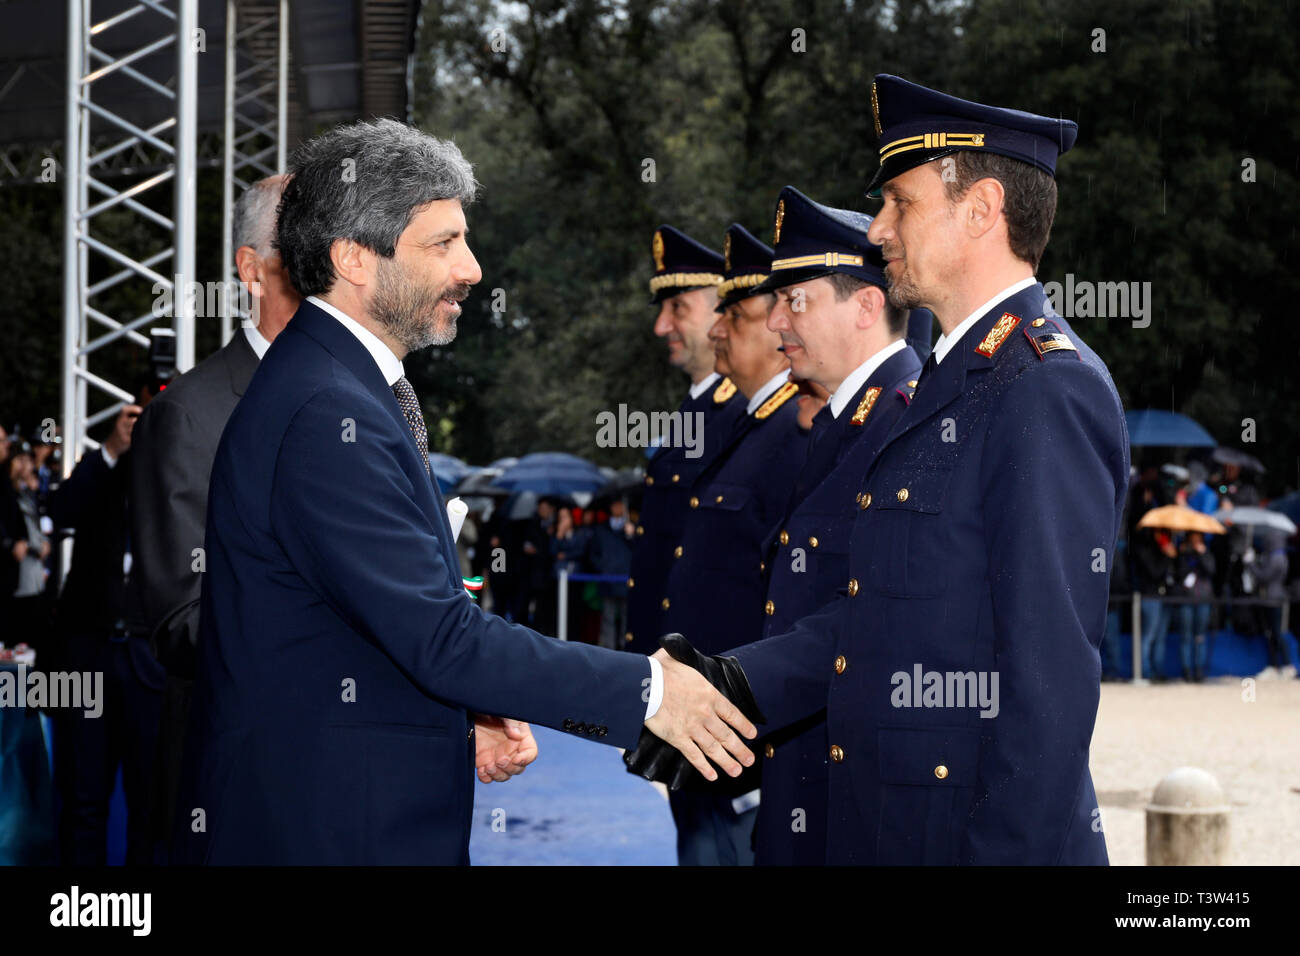 Rome, Italy - April 10, 2019: The president of the Chamber of Deputies Roberto Fico gives the medals to the deserving police officers, during the cele Stock Photo